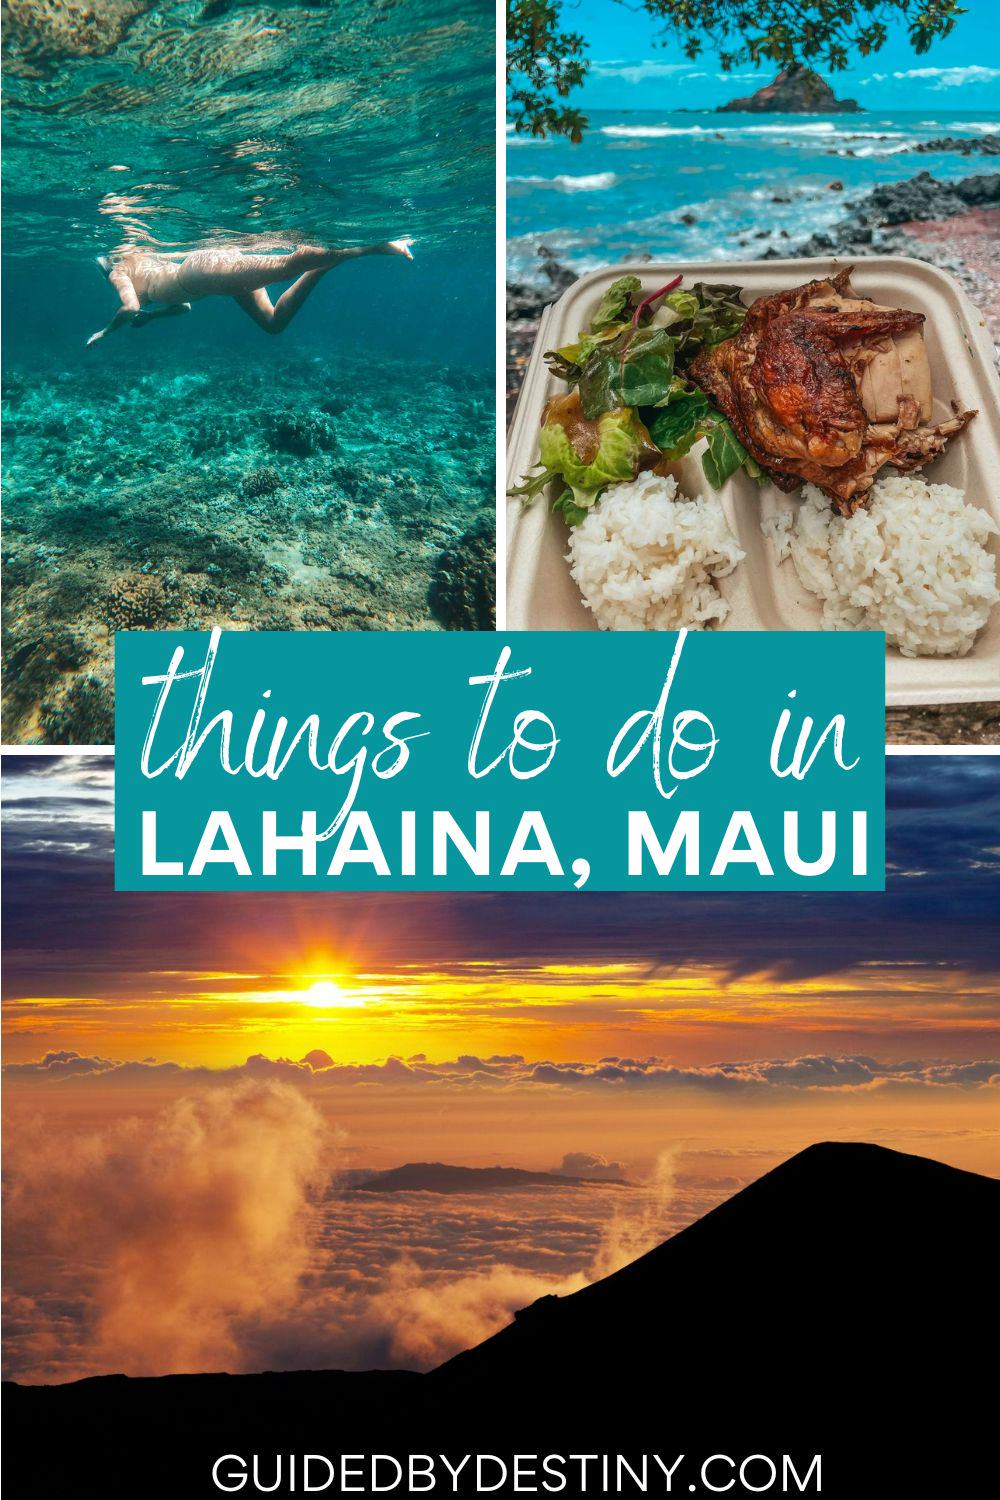 Things to do in Lahaina Maui